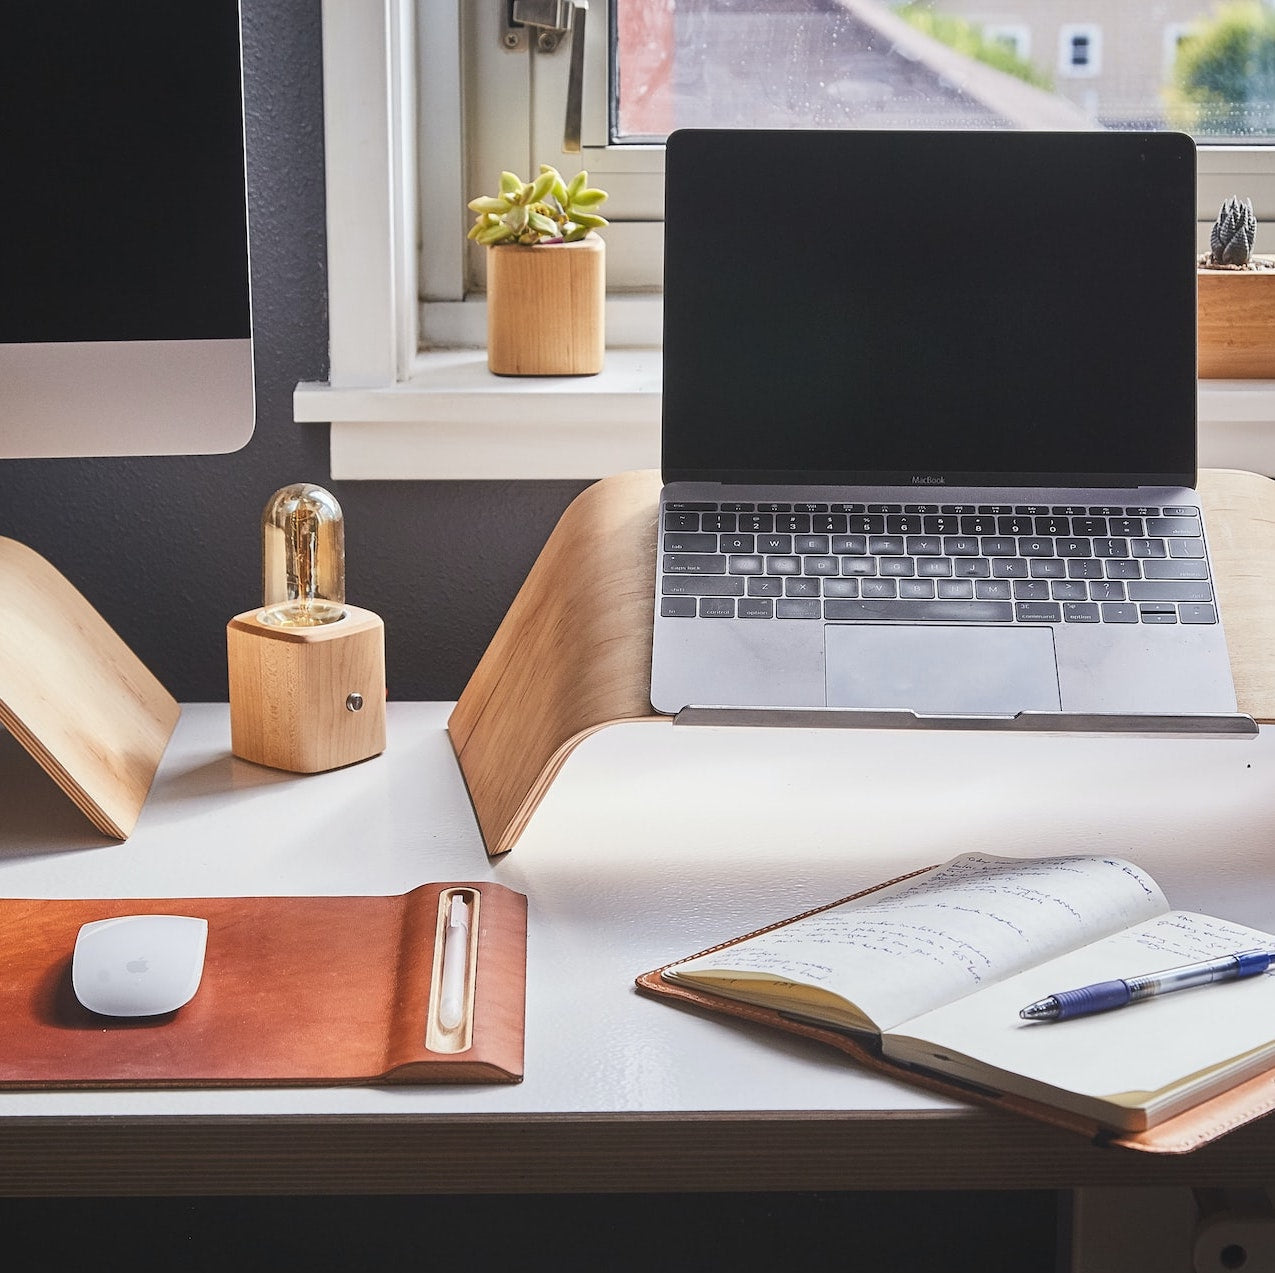 Customising Your WFH Workspace